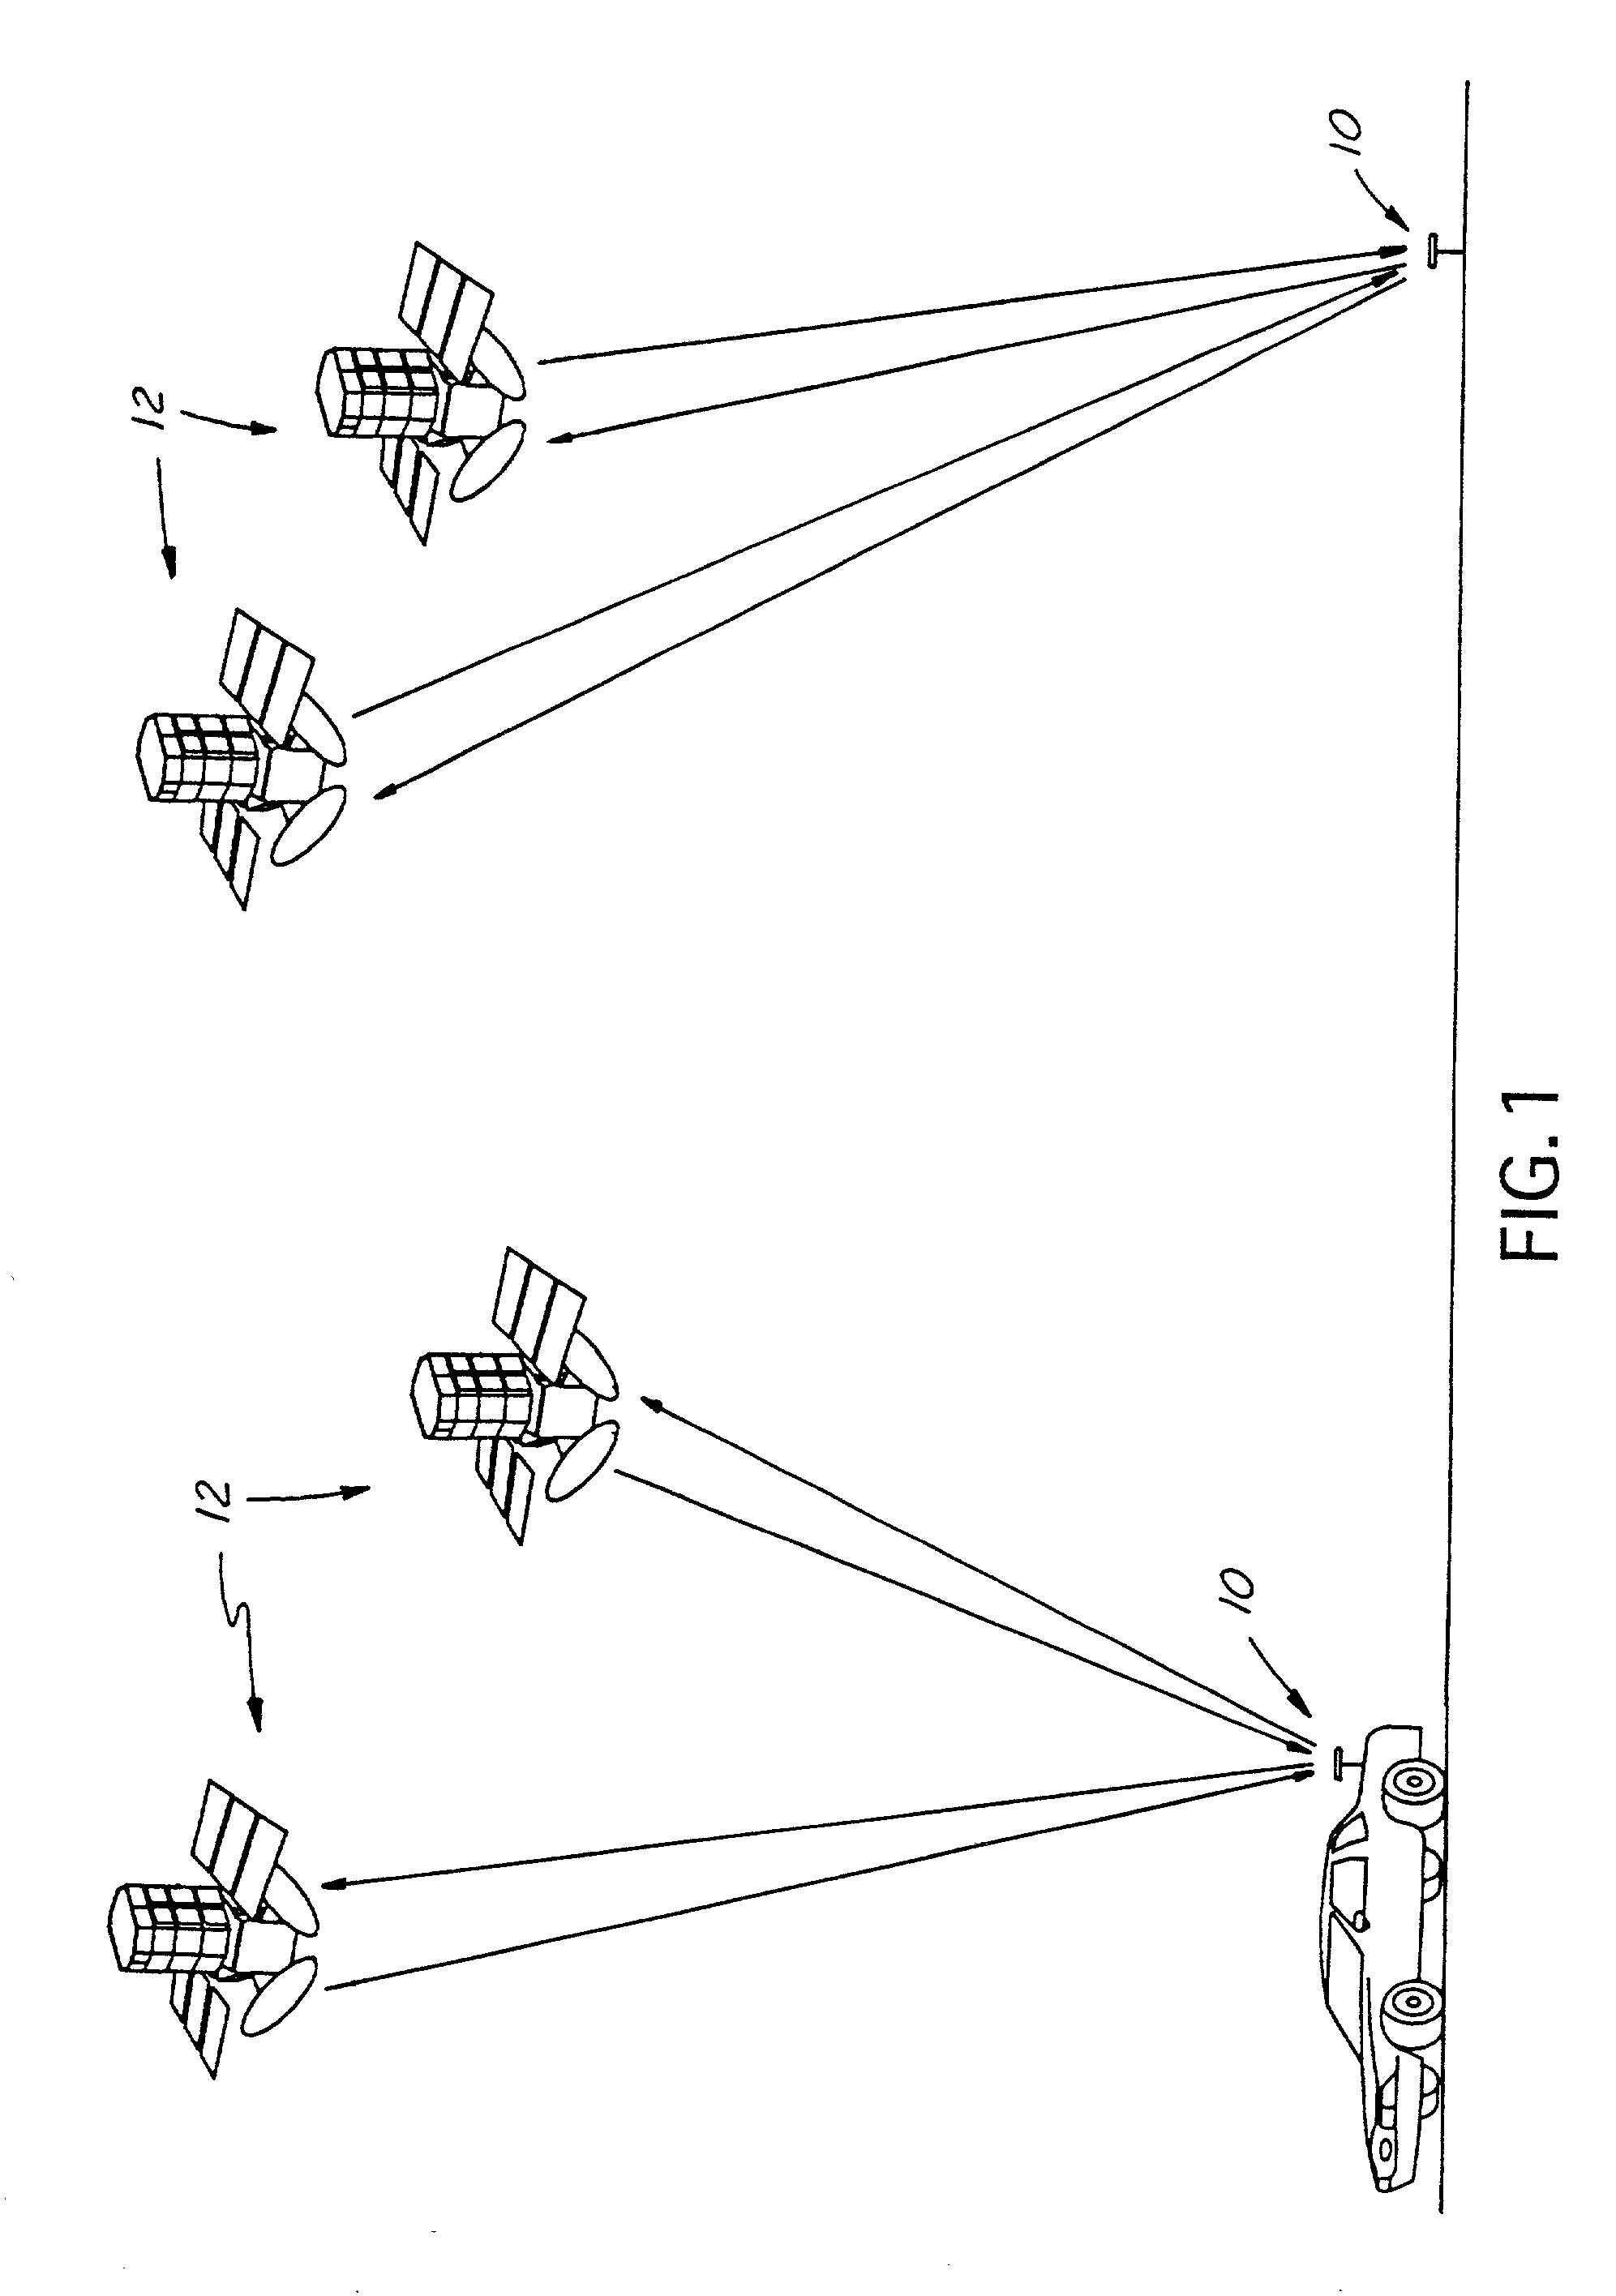 Phased array terminal for equatorial satellite constellations